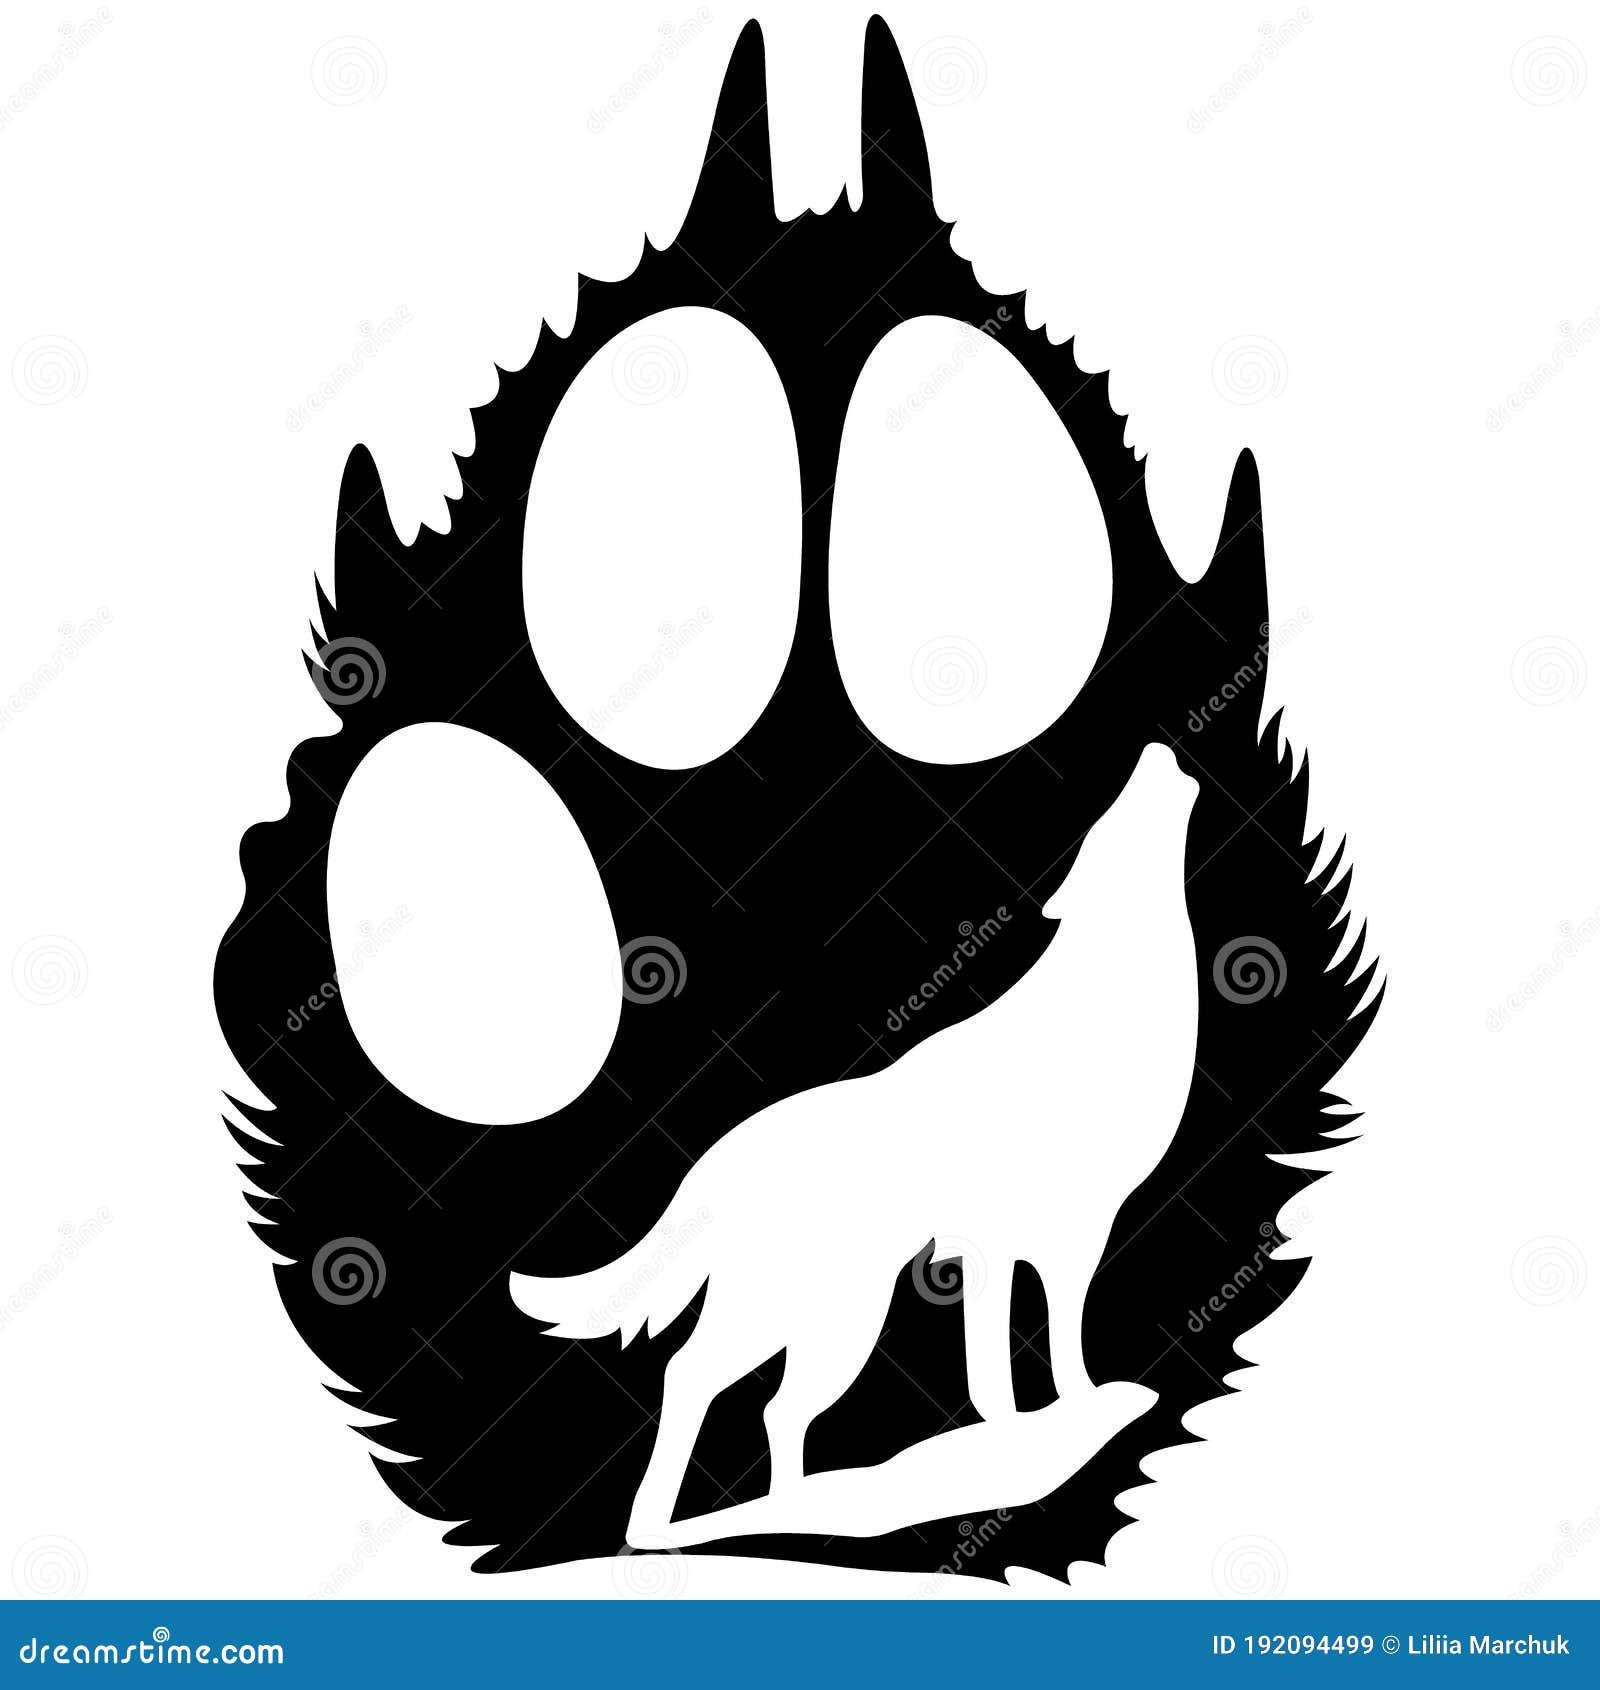 Silhouette of a Paw of a Beast Inside a Howling Wolf Drawn in a Flat Style.  Design for Tattoo, Logo, Emblem Stock Vector - Illustration of outline,  power: 192094499